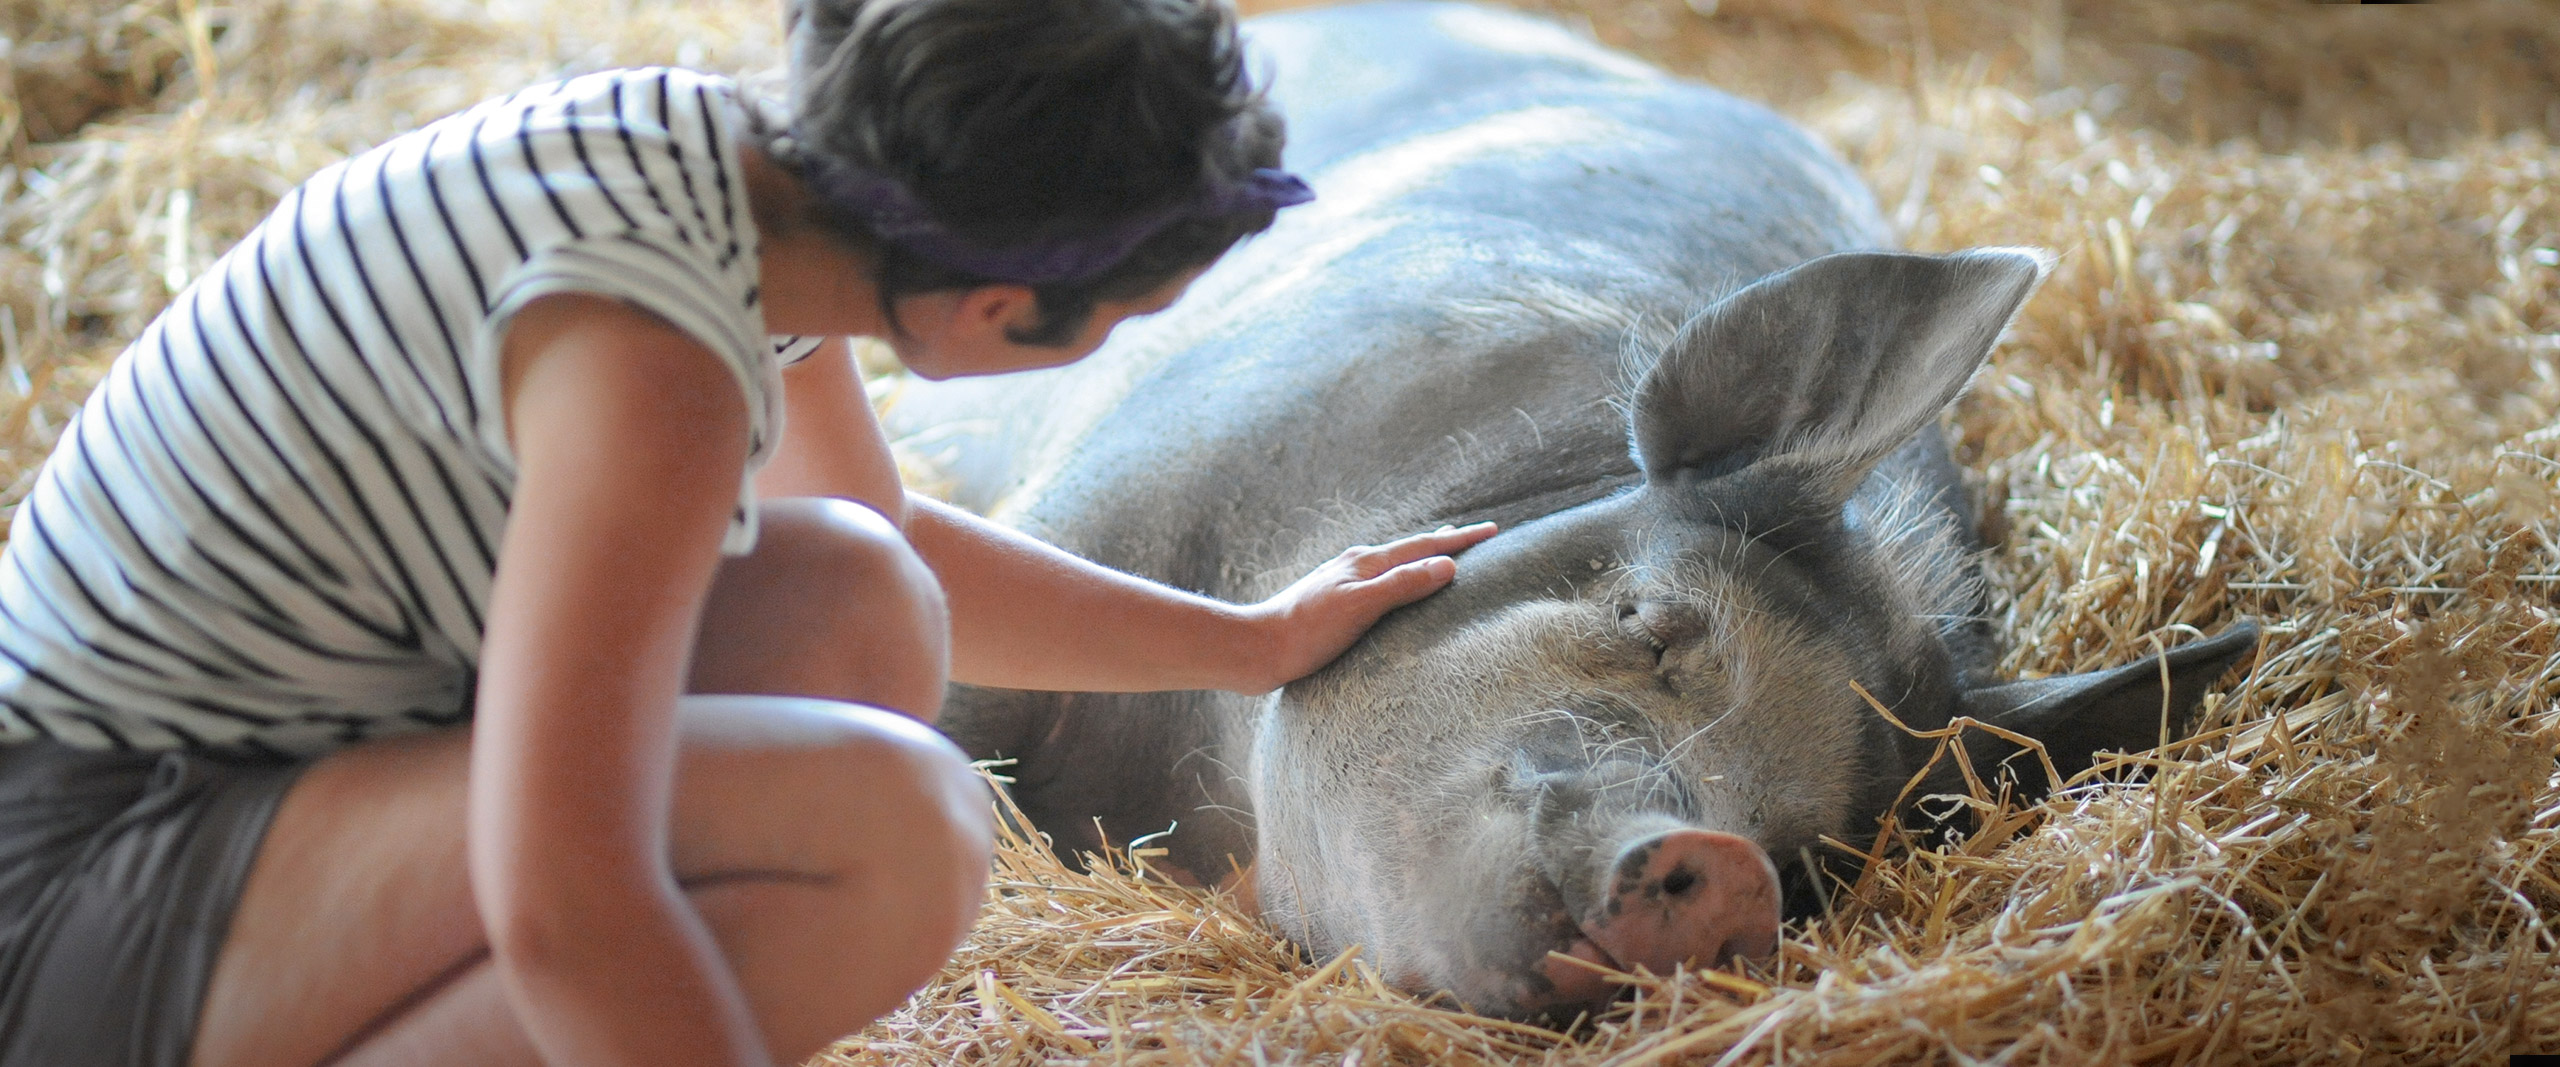 Pig in a sanctuary